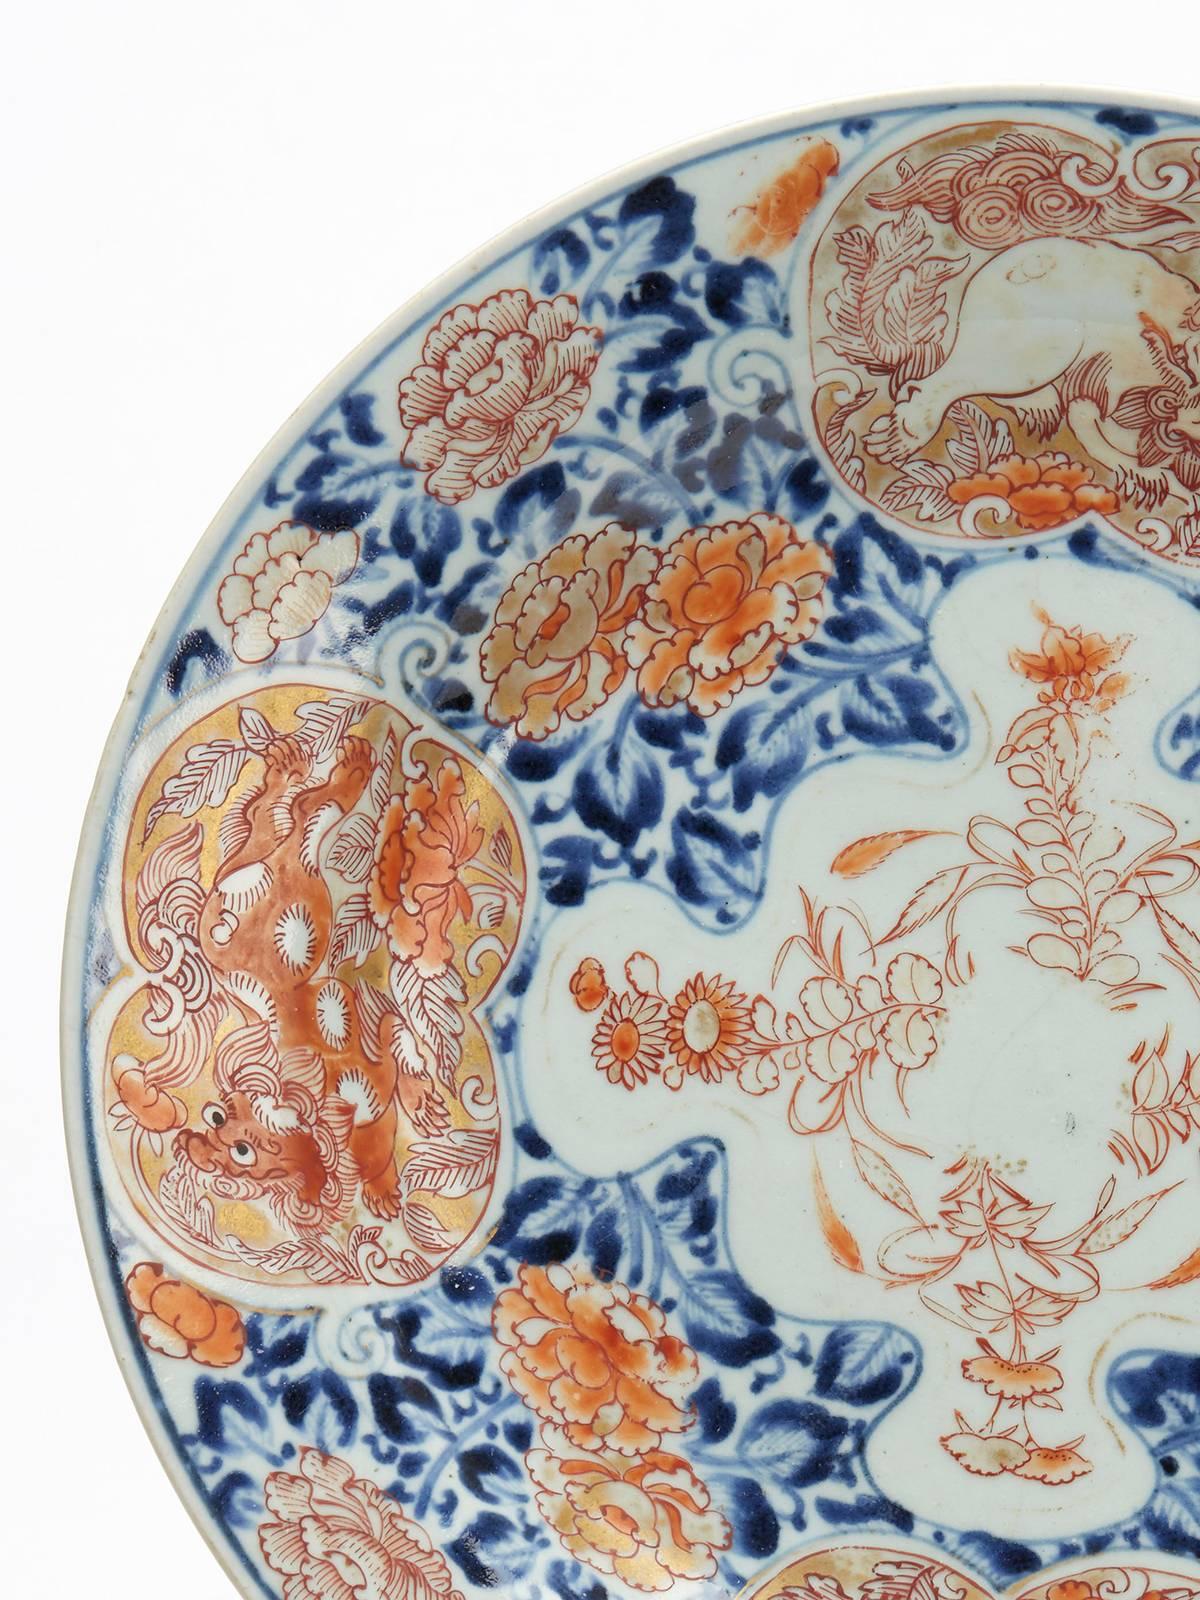 A Japanese Meiji period porcelain dish decorated in the old Imari style with panels containing mythical beasts. The rounded shallow dish is decorated in underglaze blue and overpainted in red with gilding with four panels painted with mythical